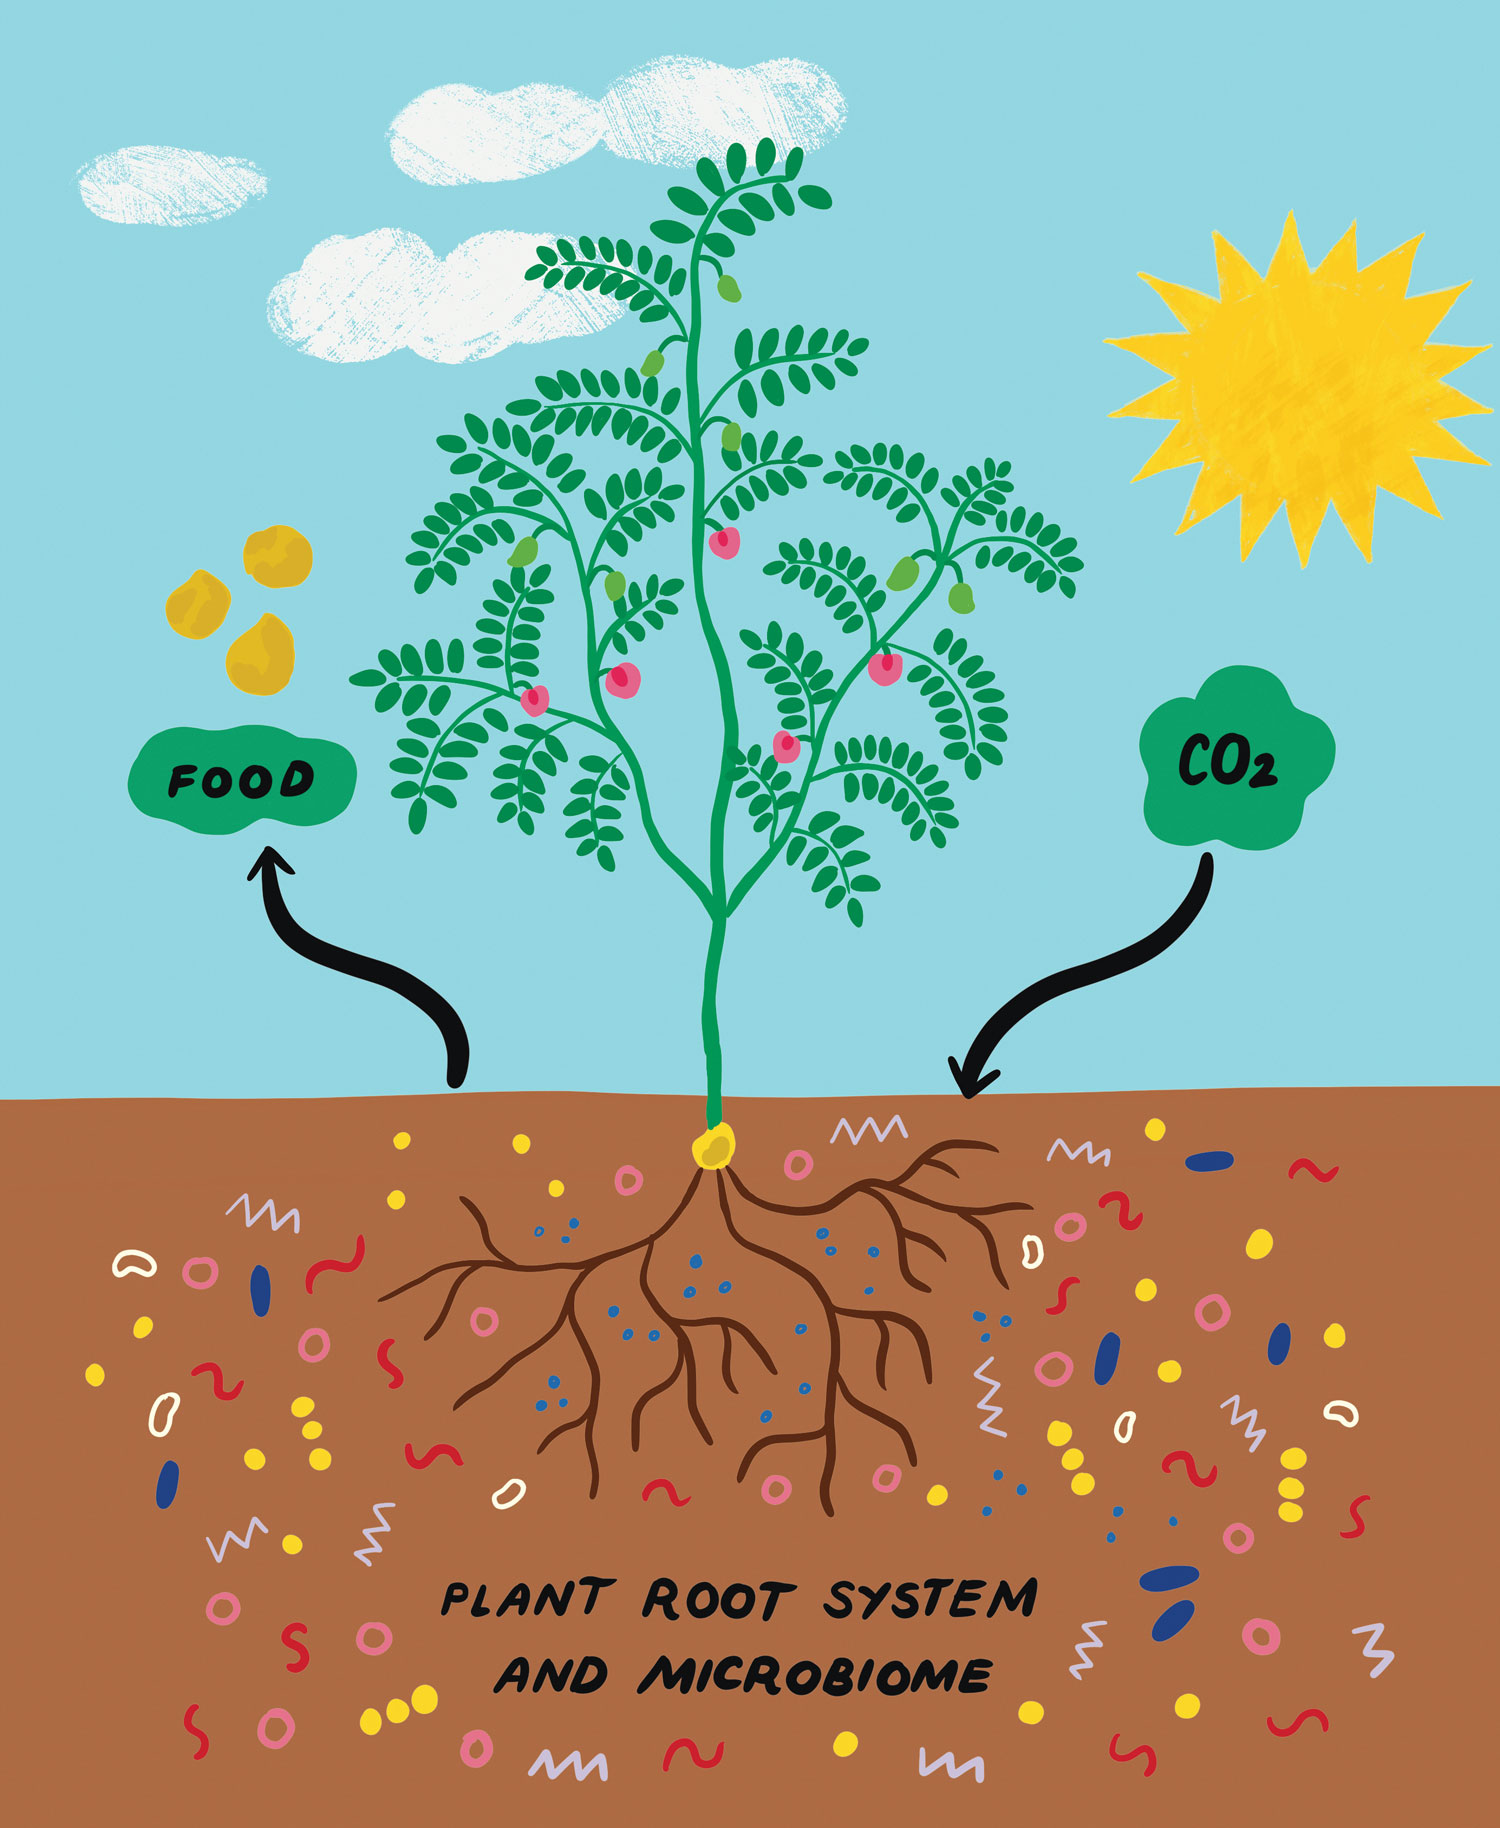 Cartoon-like drawing of a chickpea plant, showing the growth above ground and the plant root system and microbiome below, with a large sun in the sky. Arrows shows that carbon dioxide goes into the ground, while food is produced.